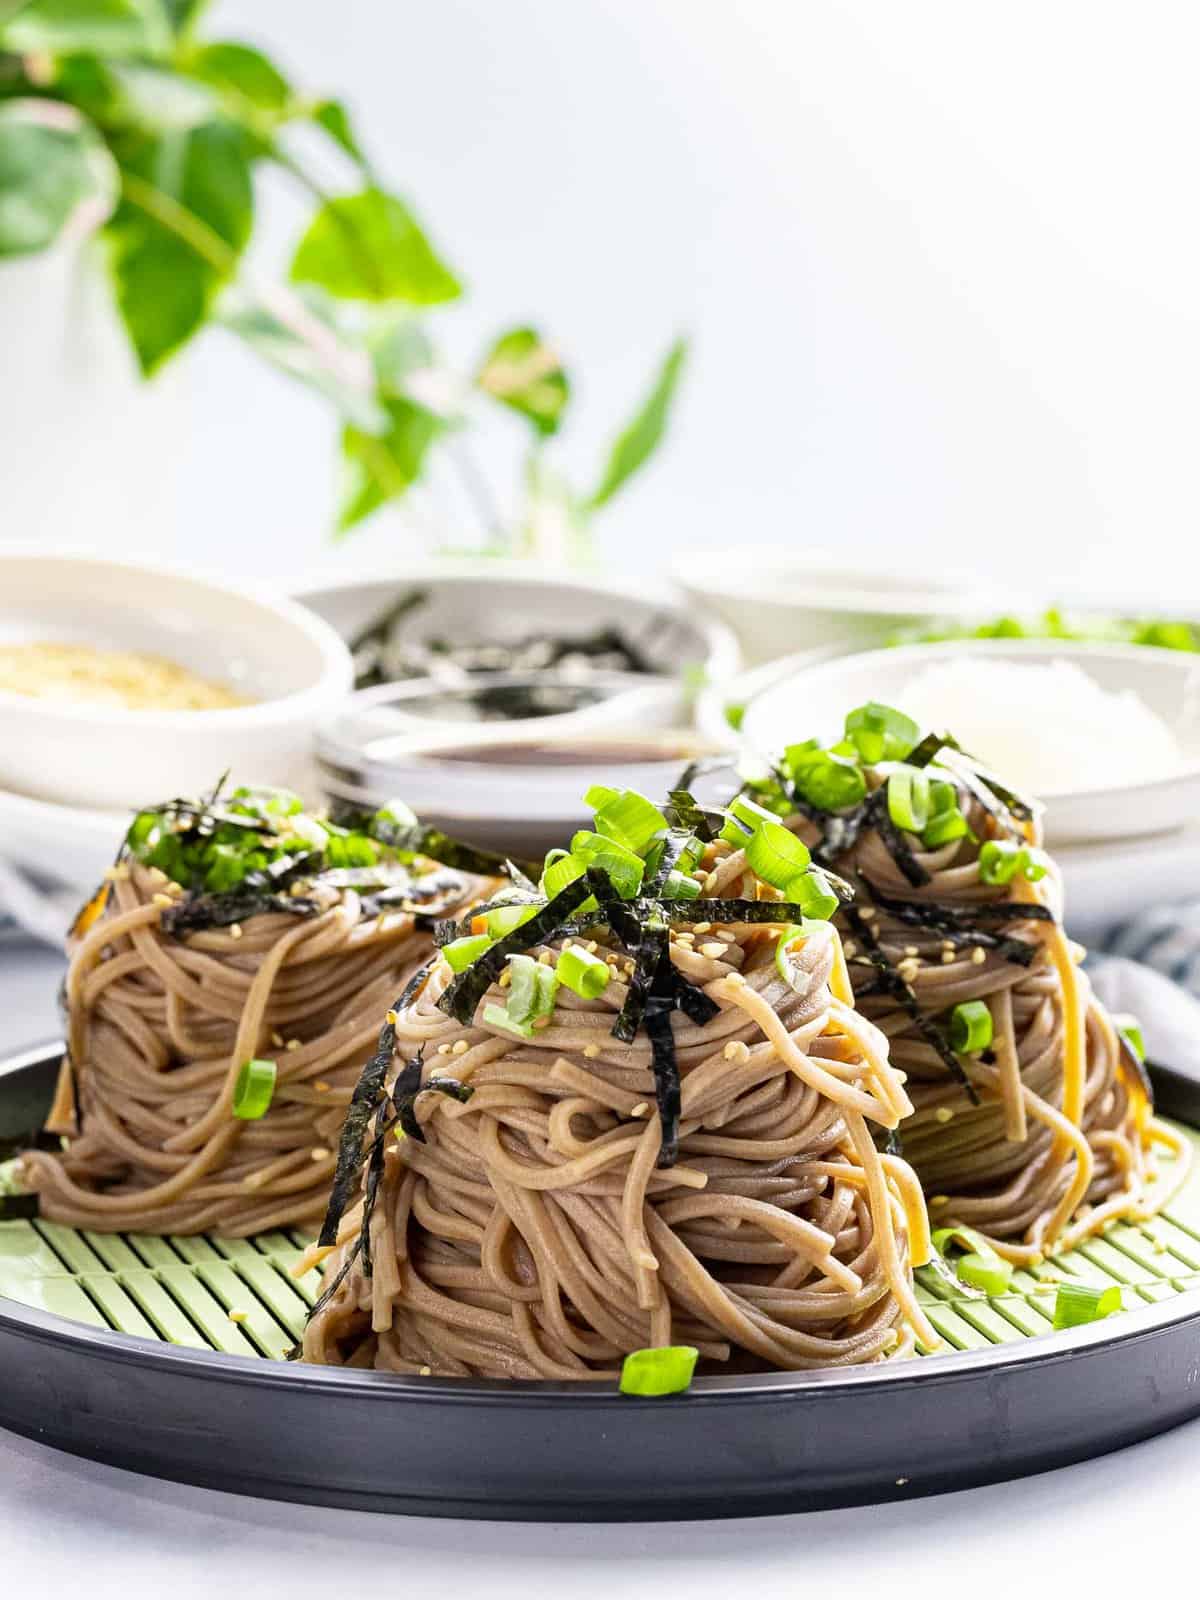 Portions of cold soba noodles topped with nori, green onions, and sesame seeds.